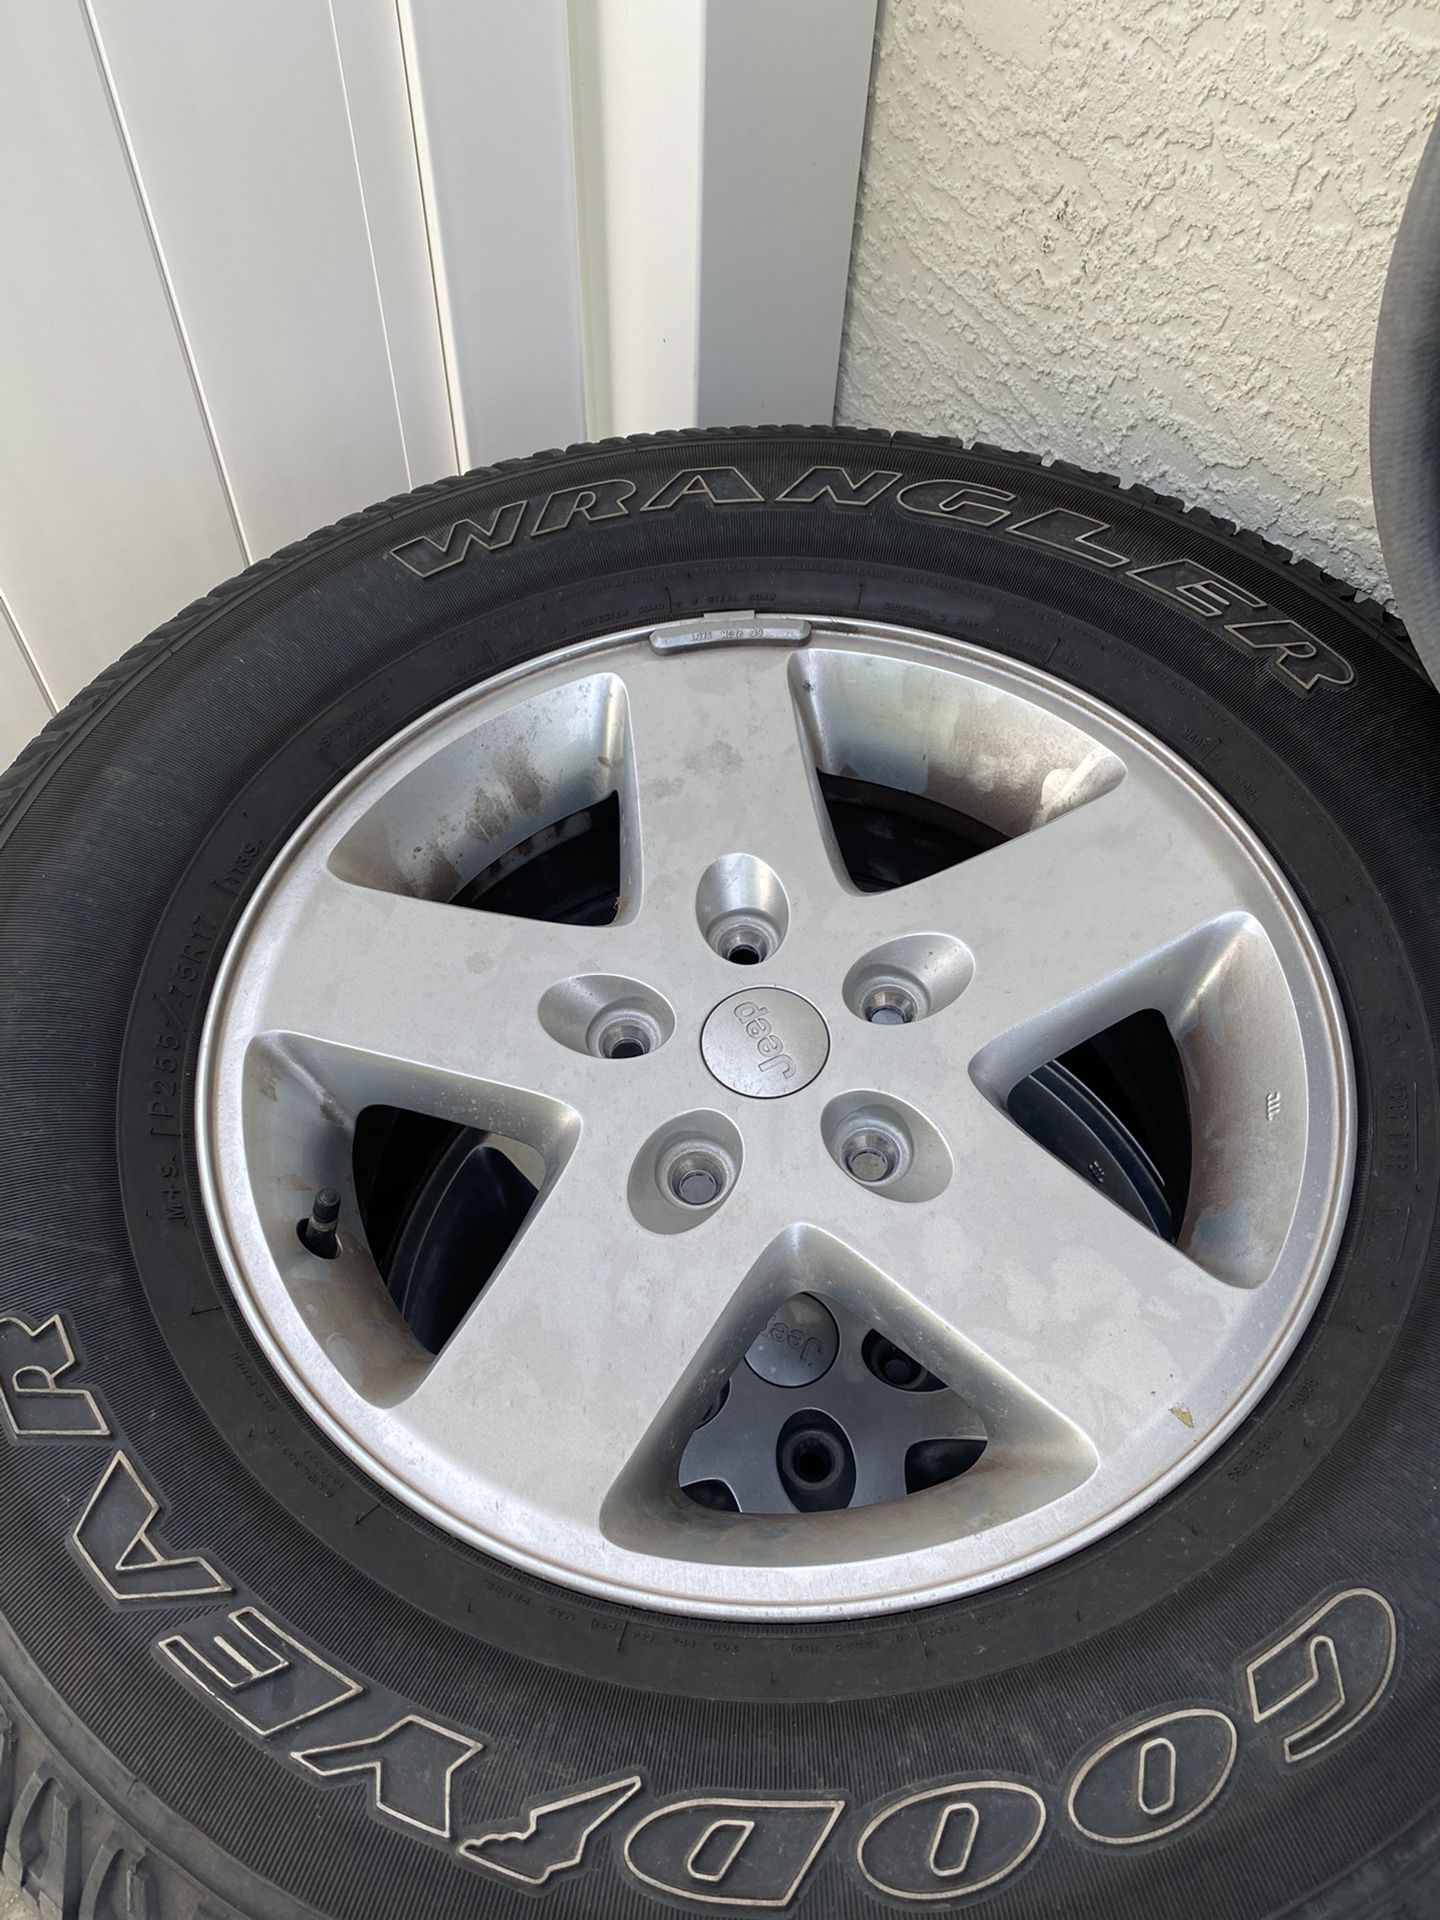 Jeep Wrangler Rims and Tires (Barley used)